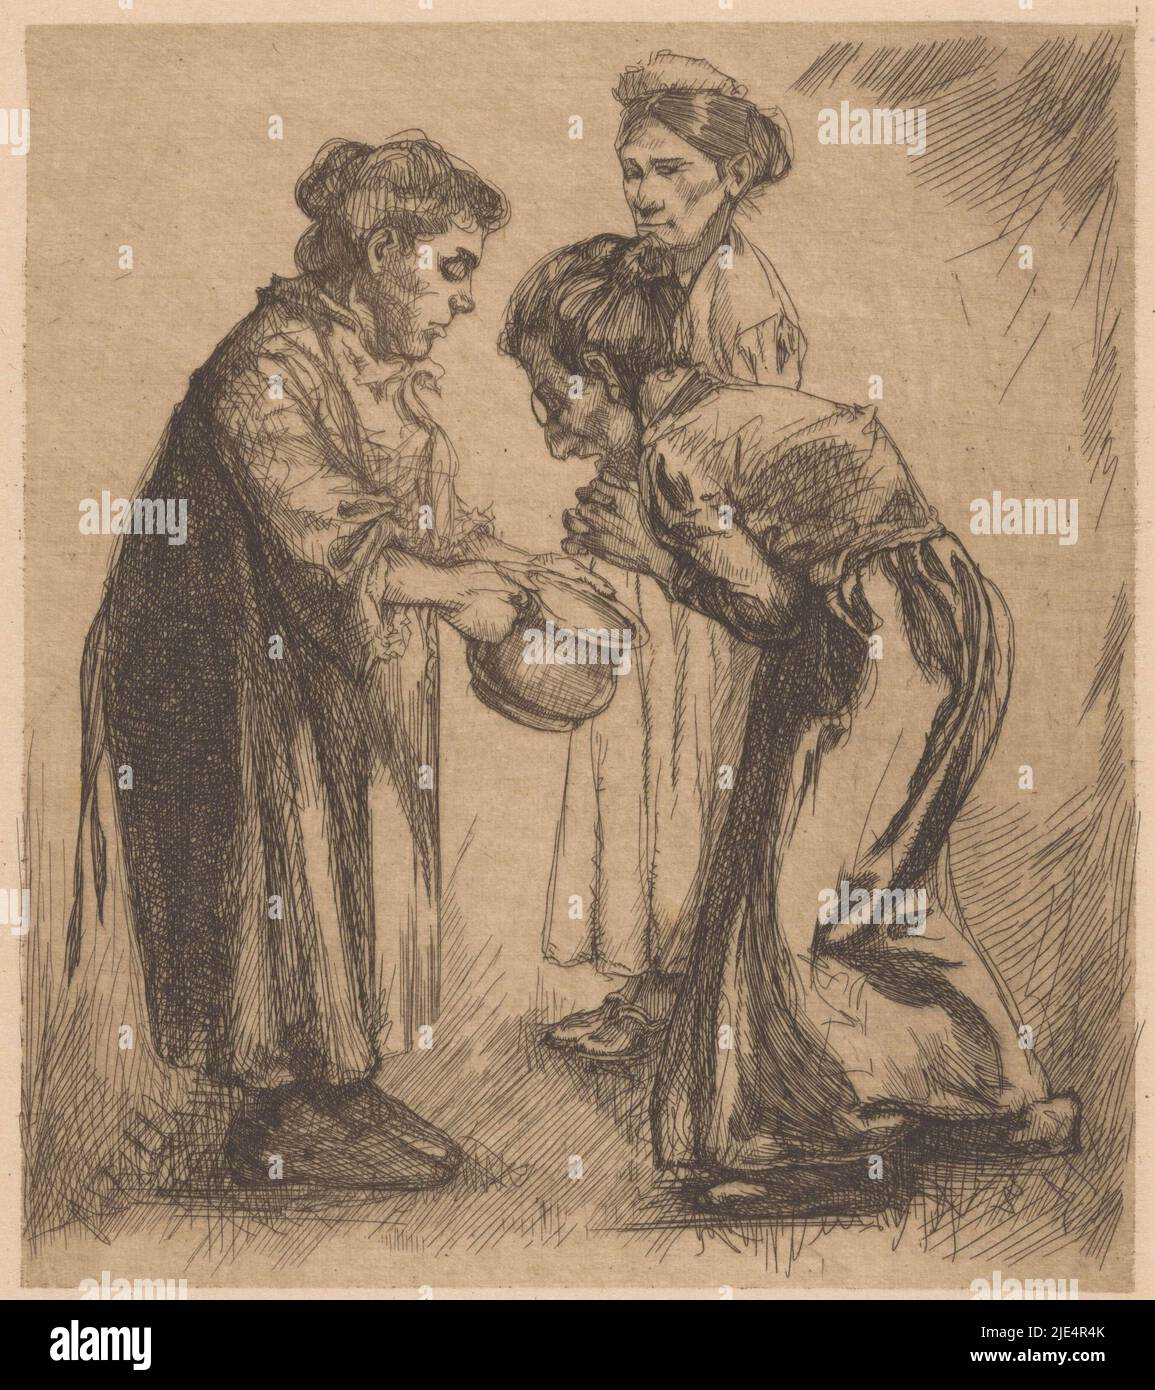 Three women, one of whom is holding a pot. The woman opposite her looks at the contents of the pot with her hands squeezed together and her mouth open., Three women with pot, print maker: Johannes Josephus Aarts, 1881 - 1934, Japanese paper (handmade paper), etching, h 188 mm × w 163 mm Stock Photo